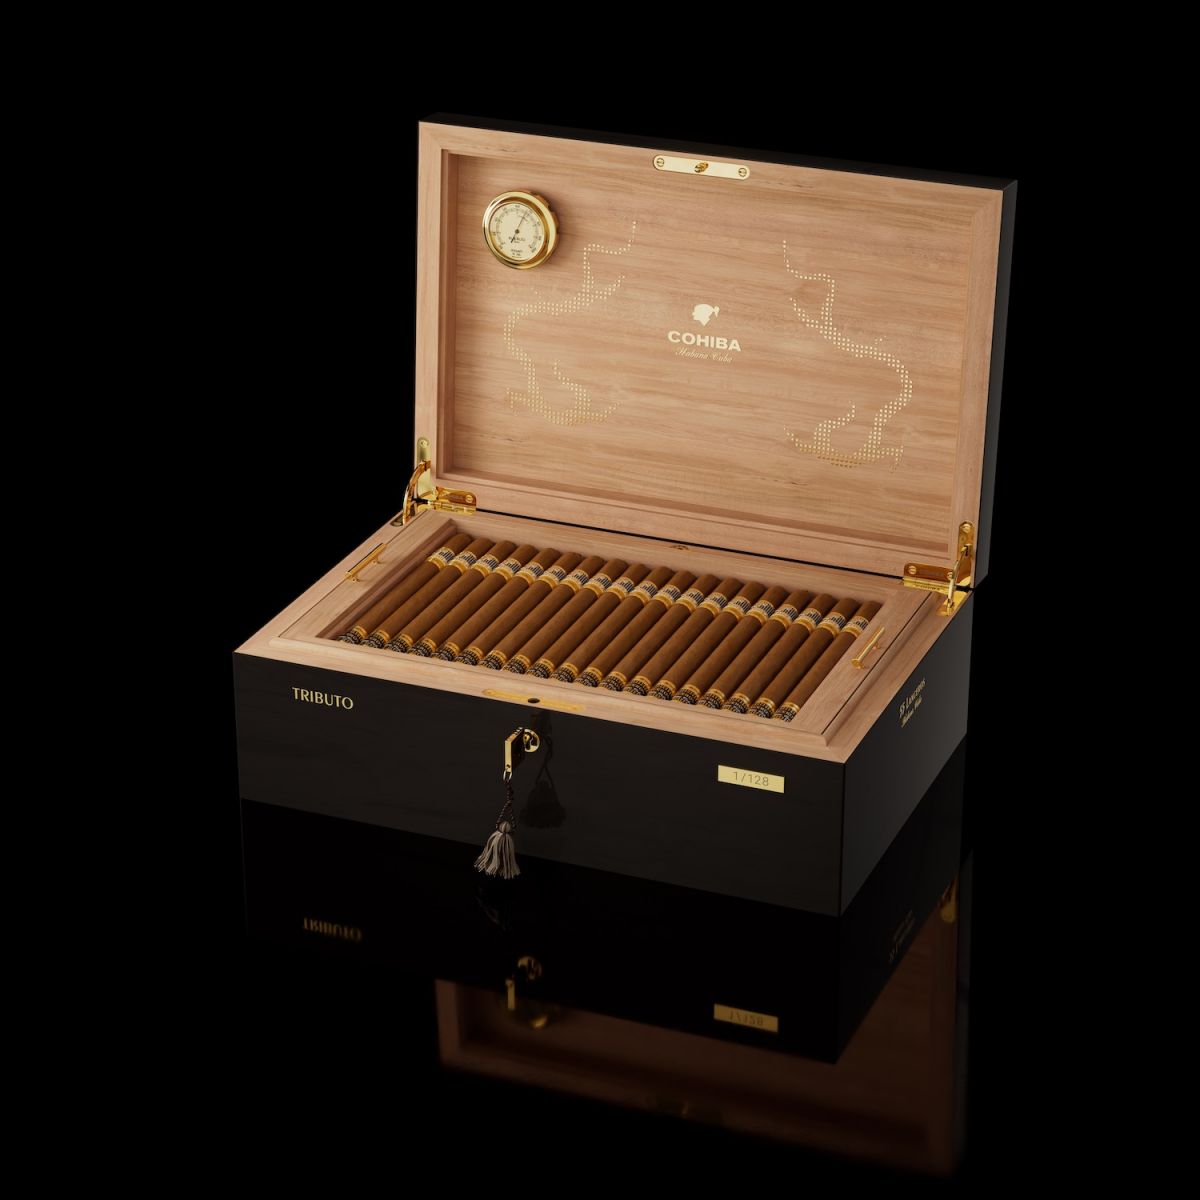 Cohiba-Tributo-Limited-Edition-Humidors-Year-of-the-Dragon